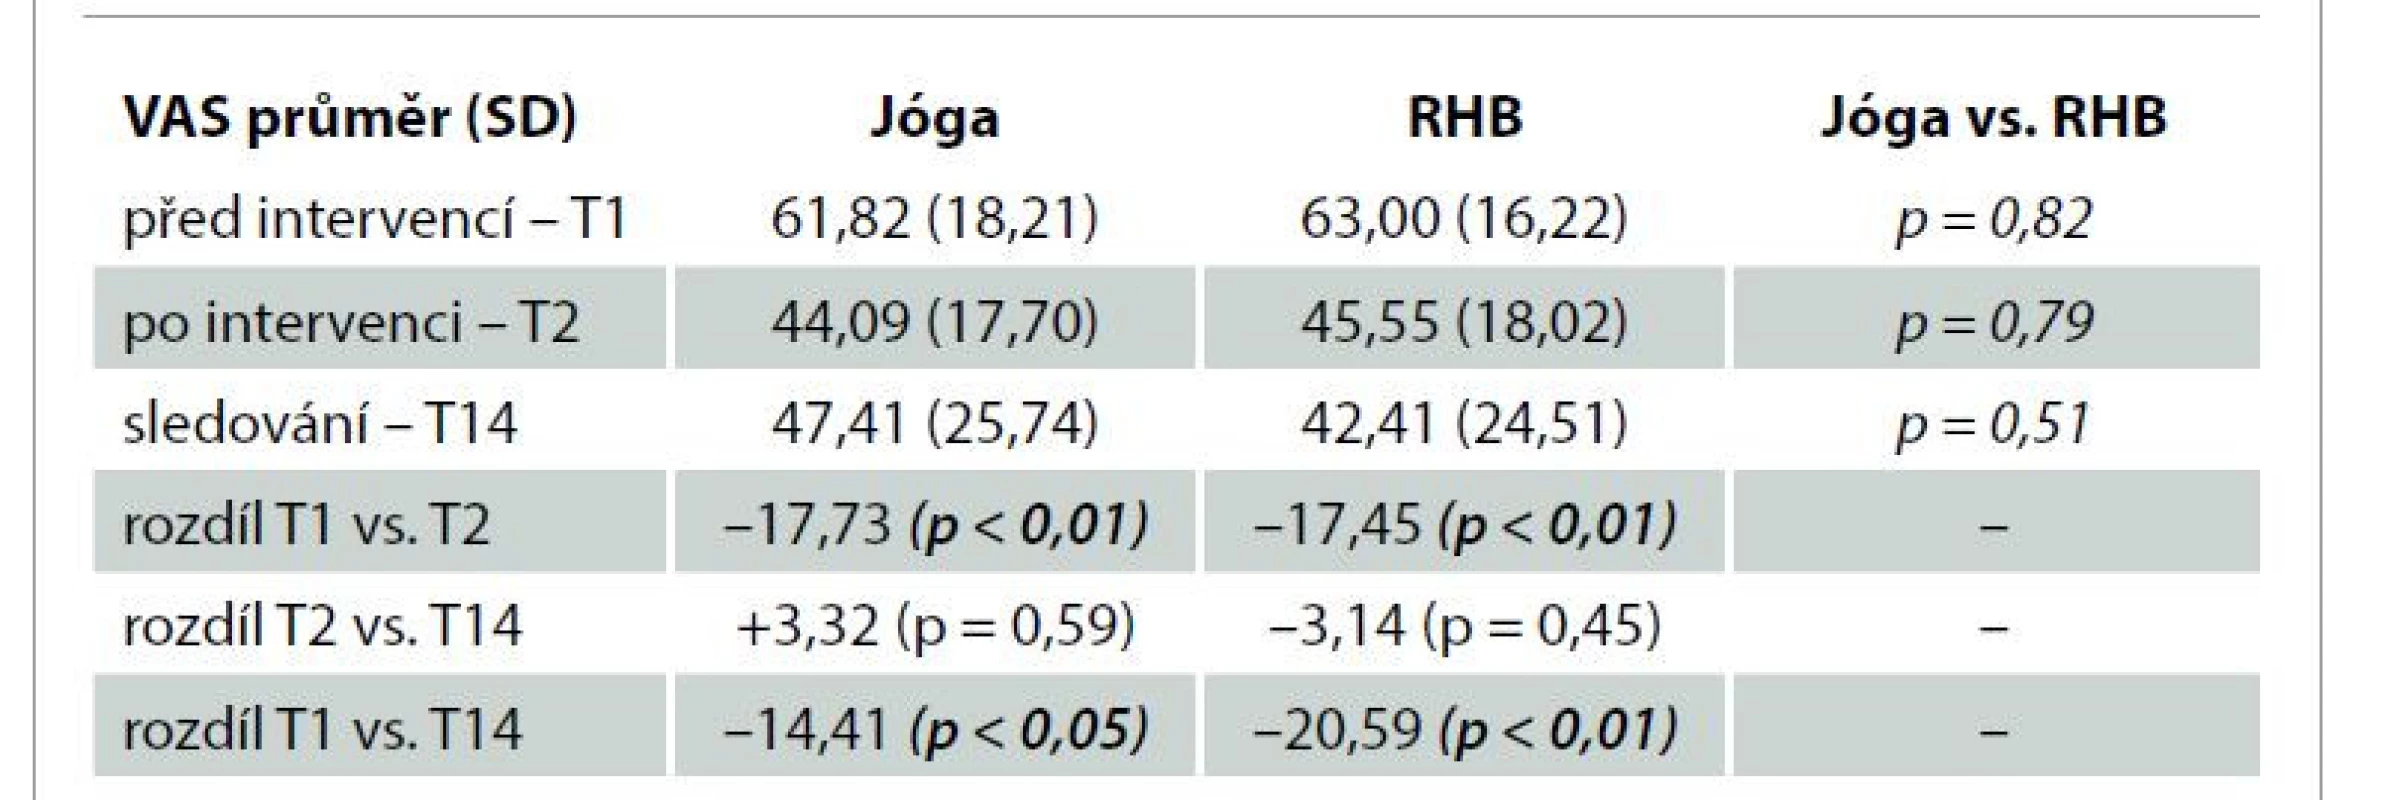 Vývoj hodnot VAS v čase a porovnání mezi skupinami Jóga a RHB.<br>
Tab. 2. Changes in back pain values in time and differences between the Yoga and
Rehabilitation groups.